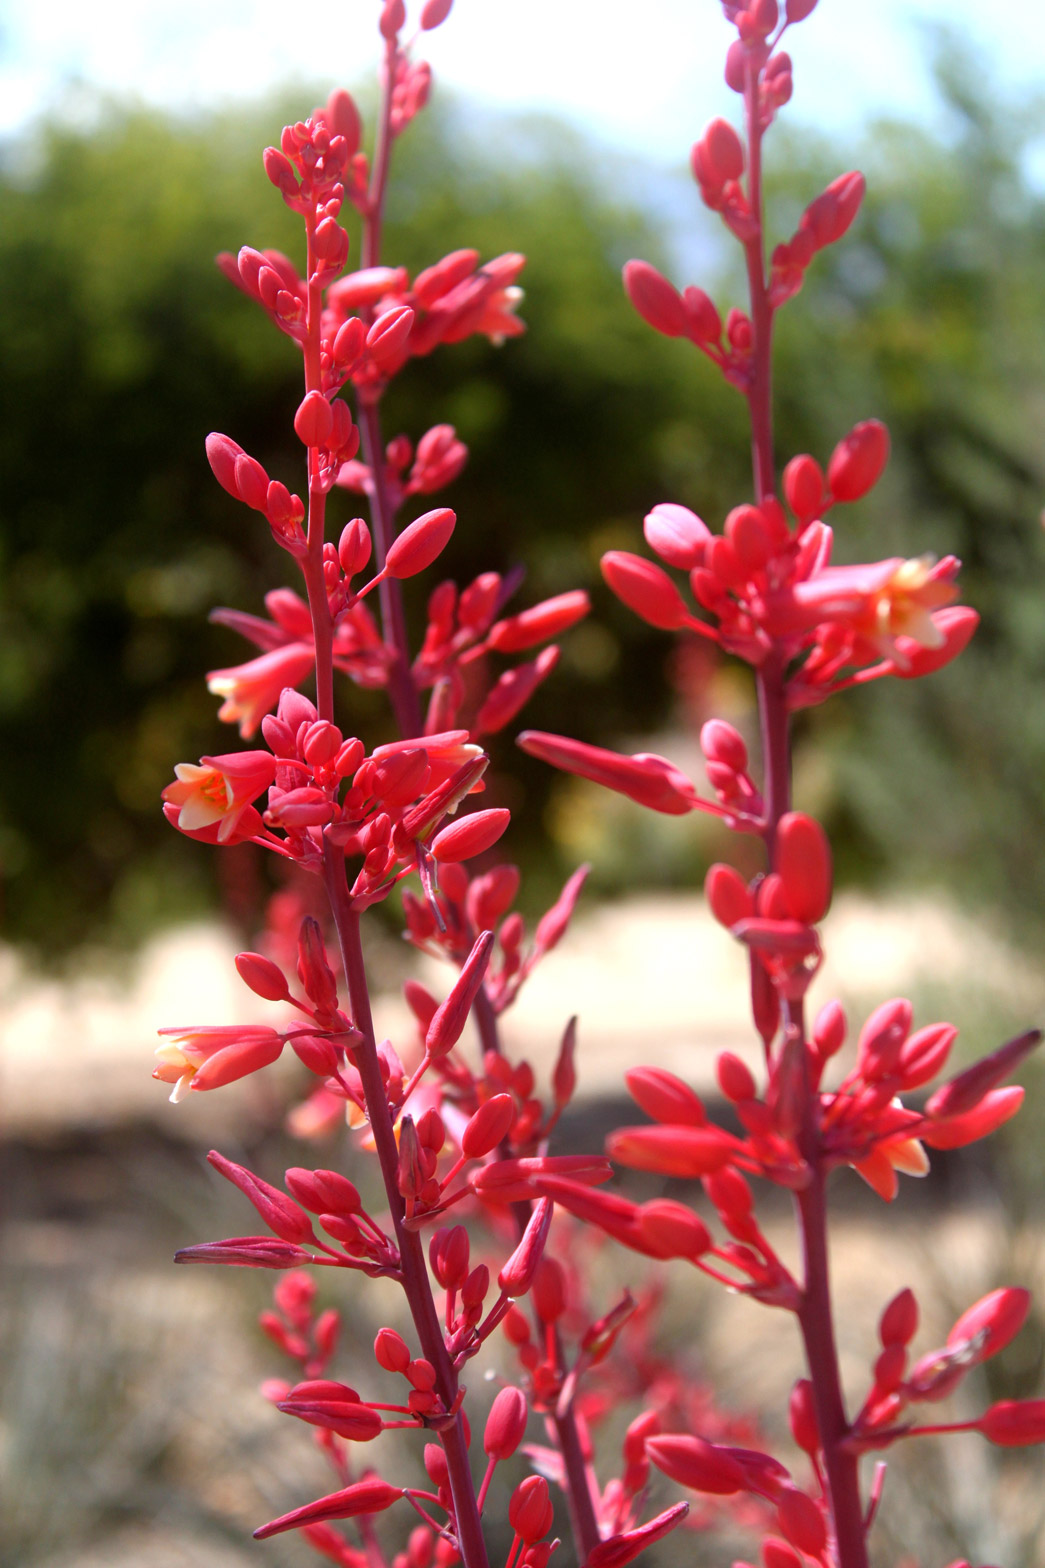 A close-up of bright red Hesperaloe flowers along a stalk.